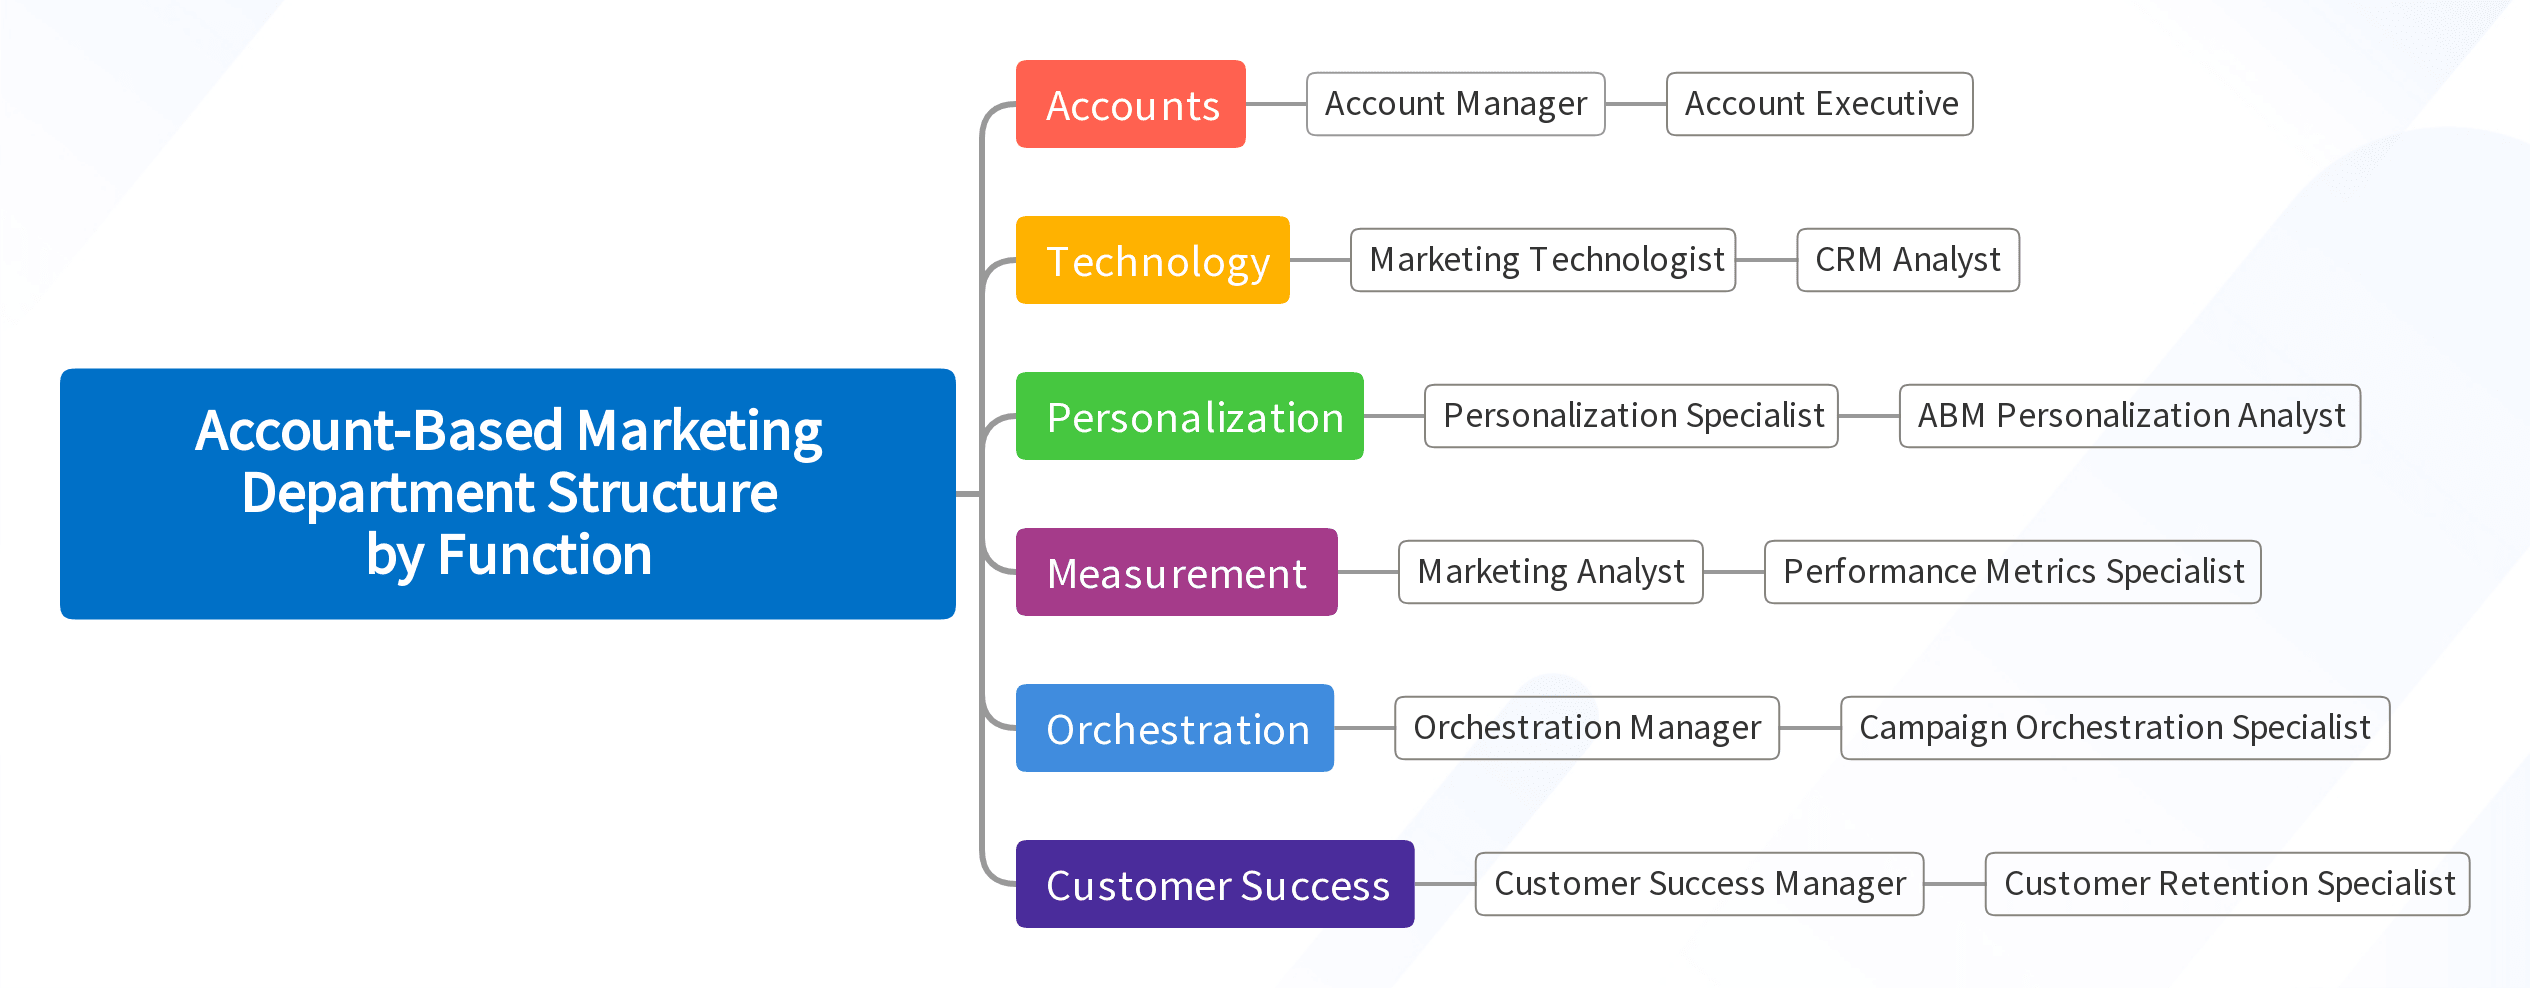 Account-Based Marketing Department Structure by Function